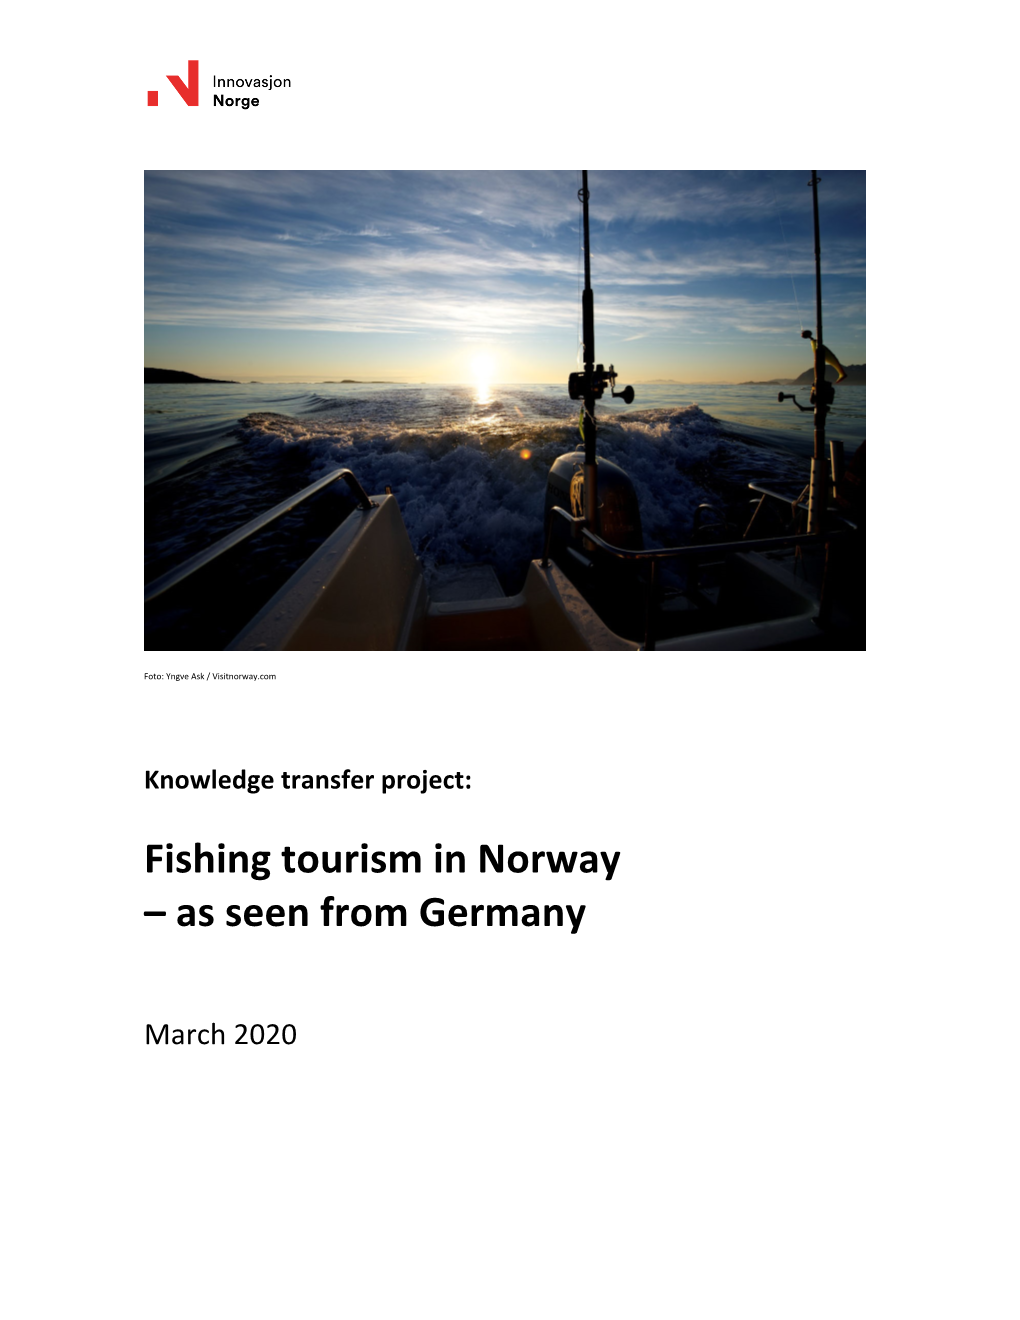 Fishing Tourism in Norway – As Seen from Germany